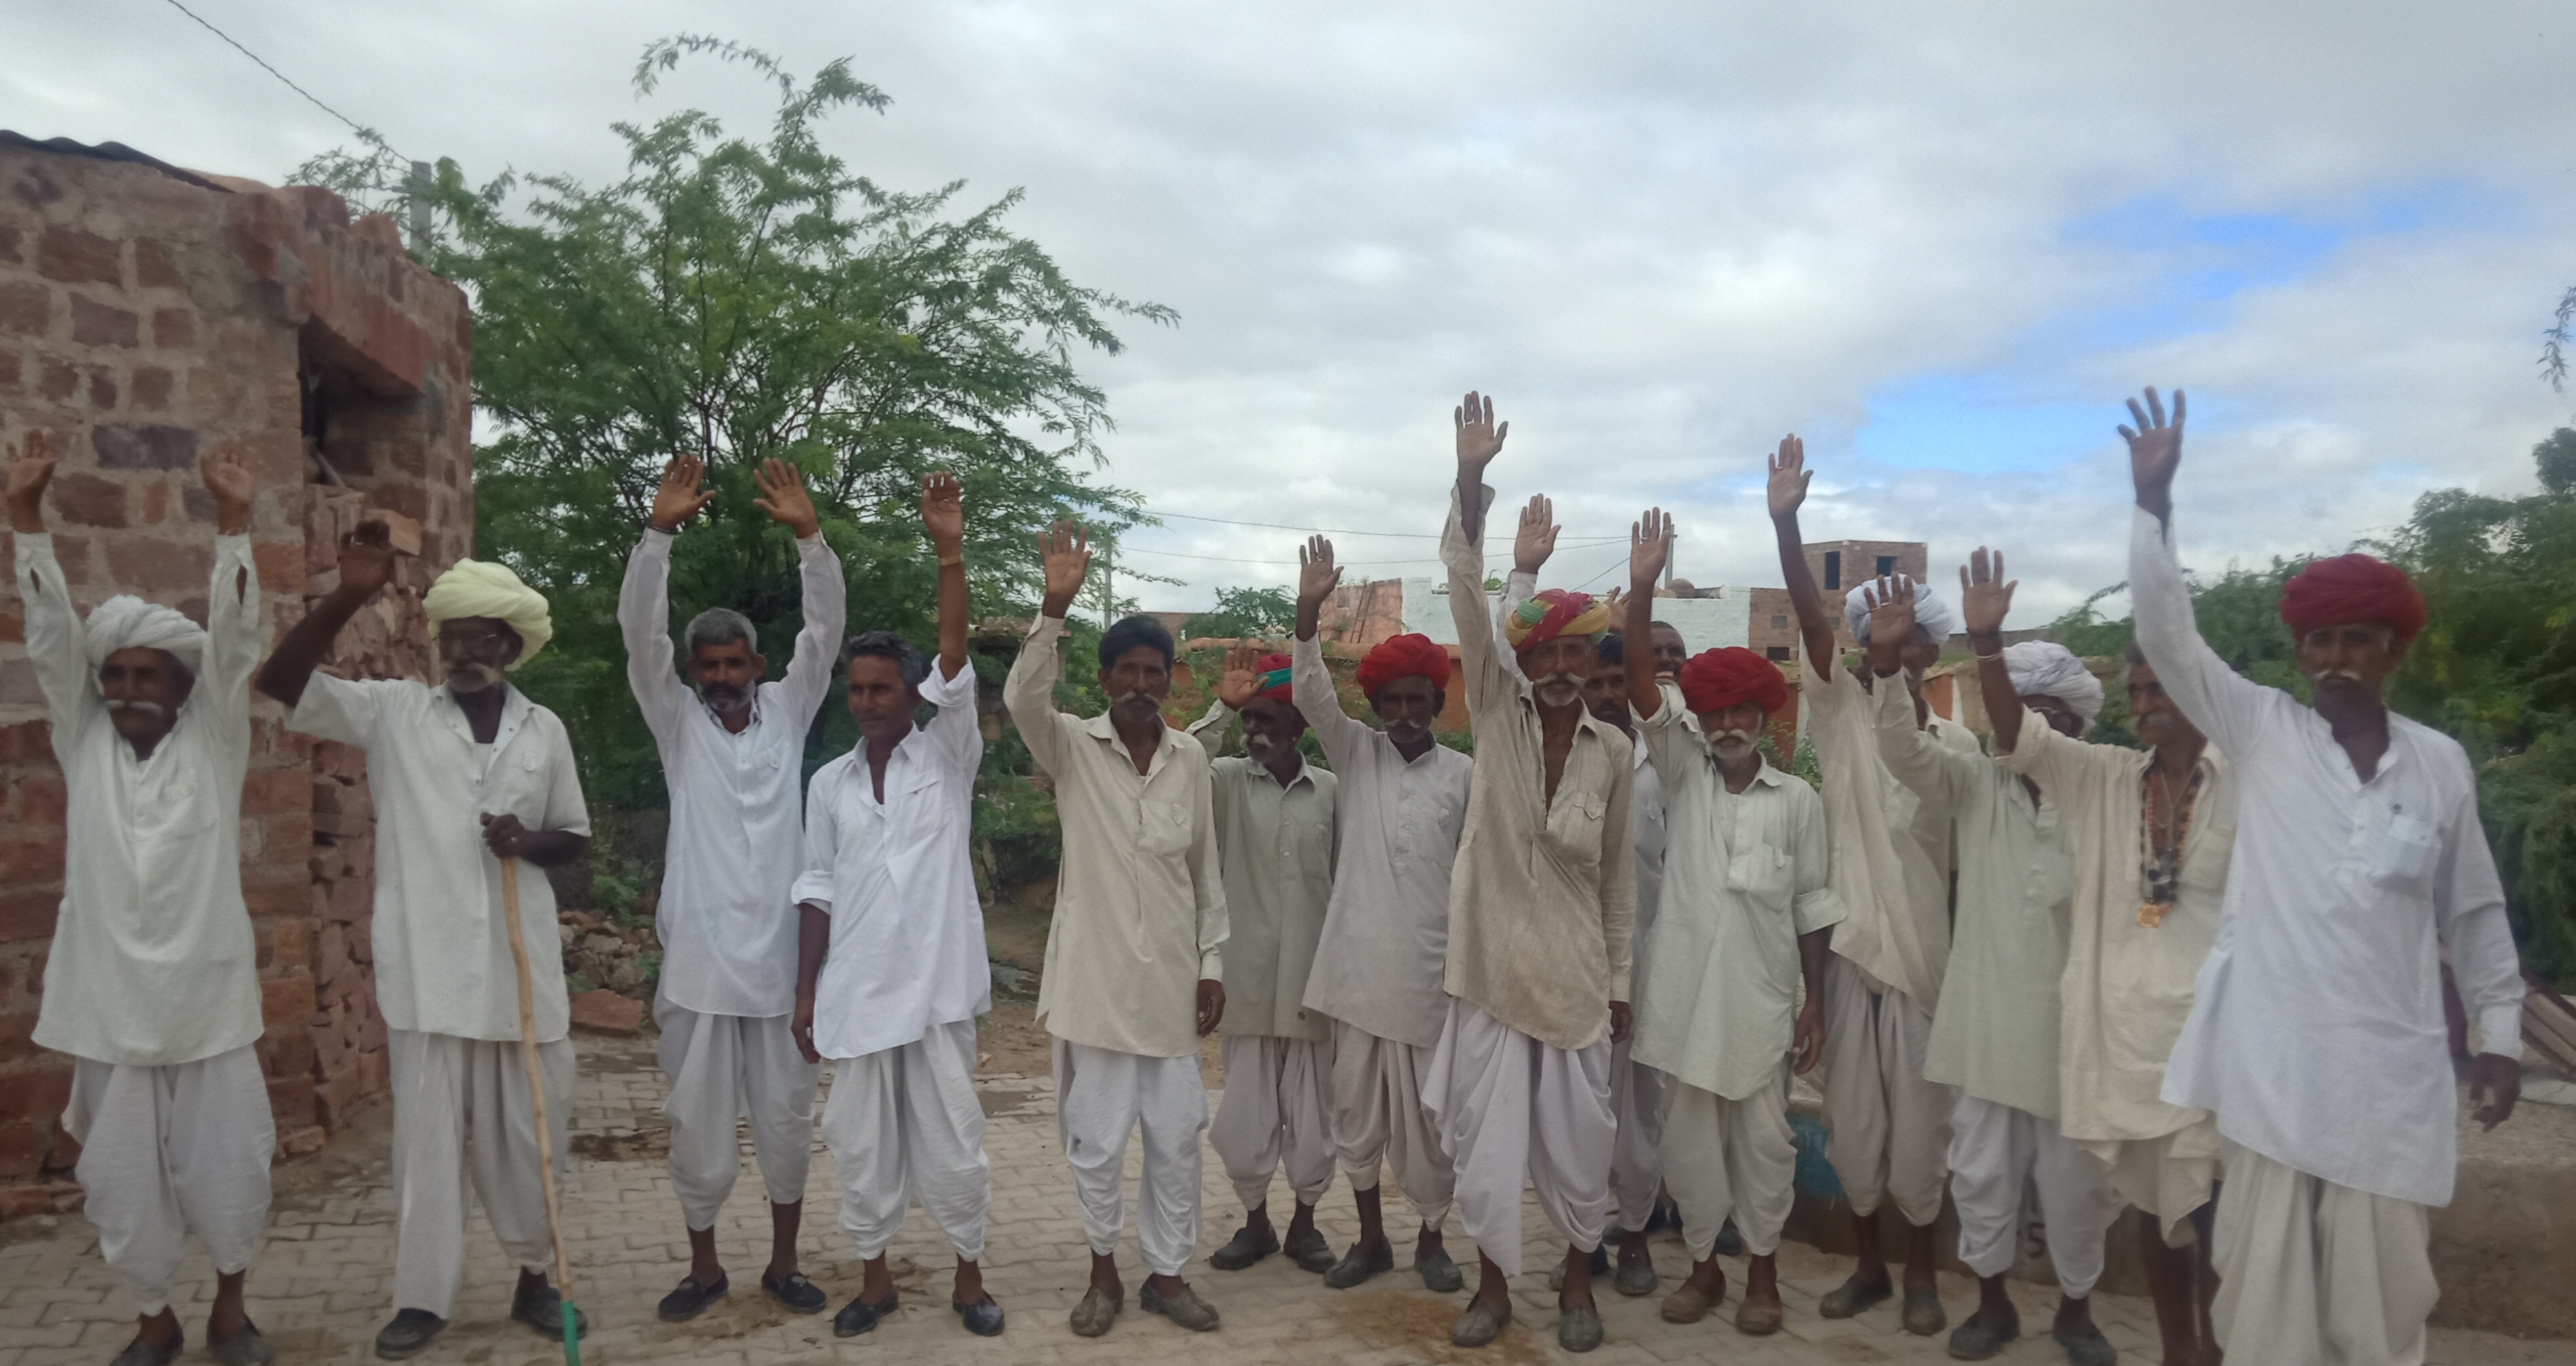 Angry villagers shouted protest